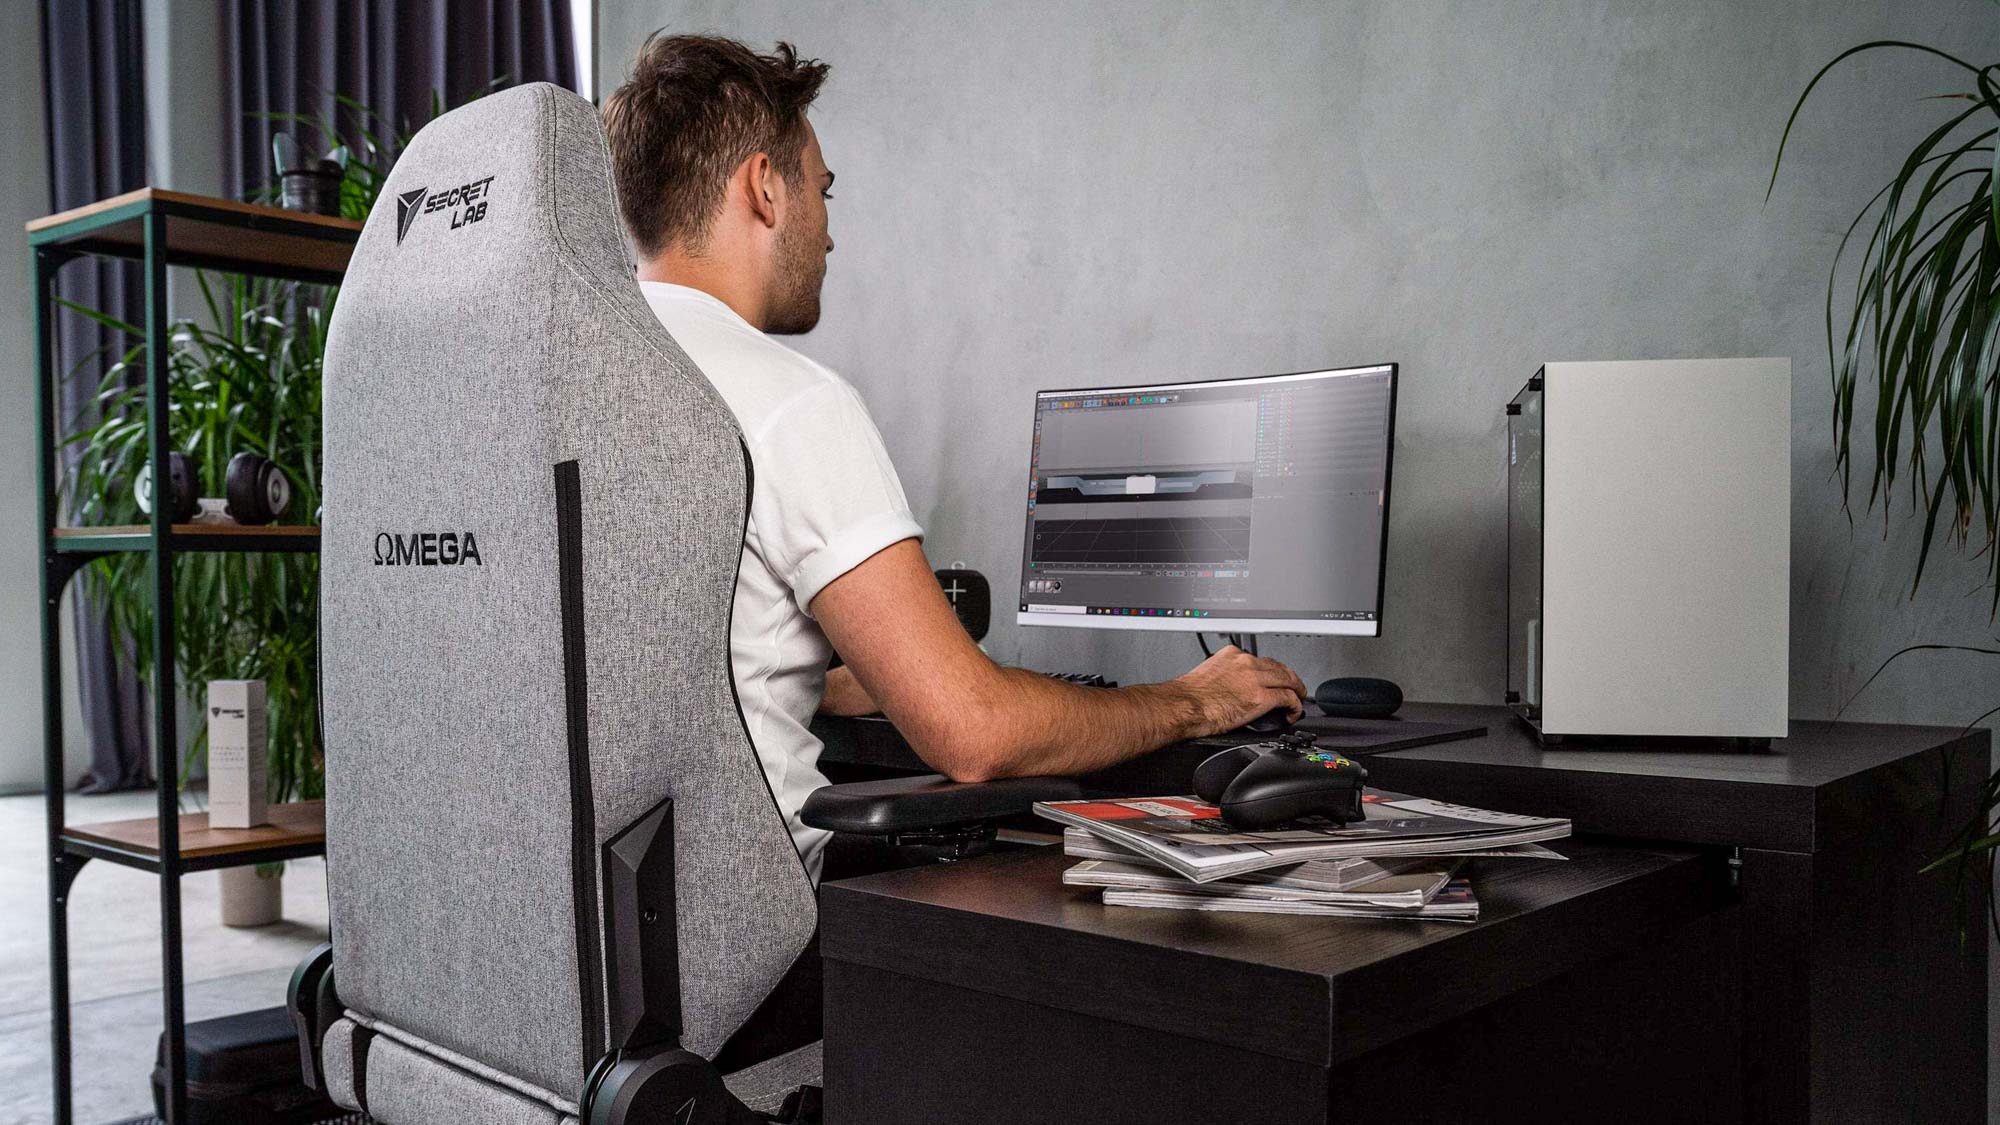 Secretlab Omega 2020 Gaming Chair Review: All-Day Comfort - Tom's